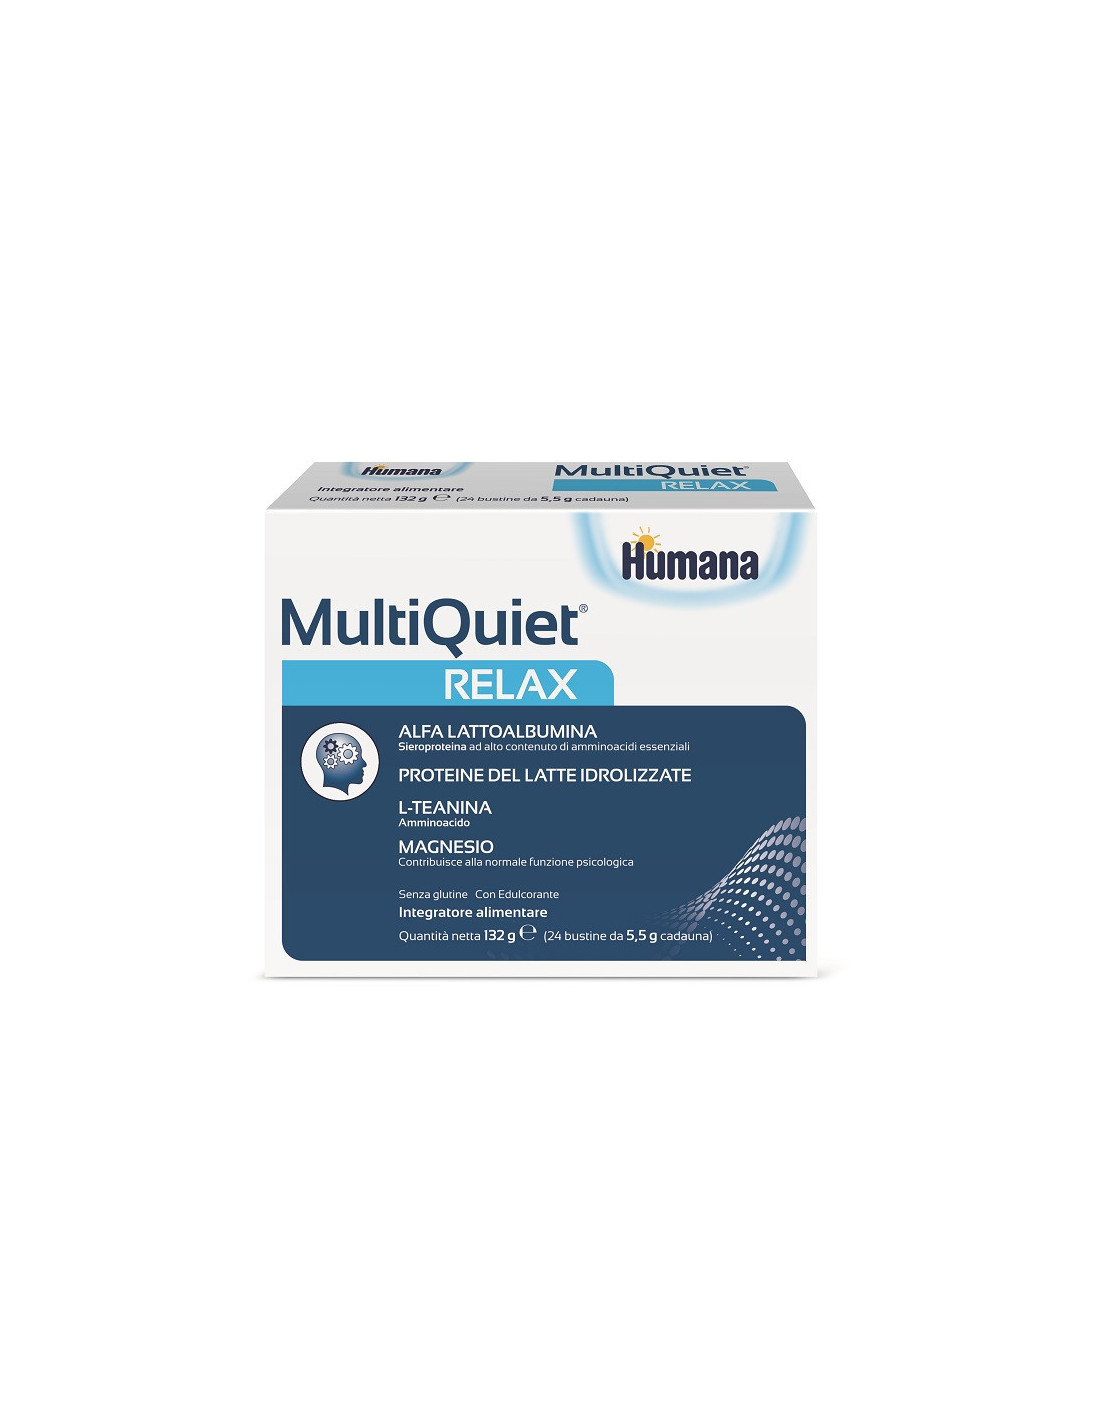 Image of MultiQuiet(R) RELAX Humana 24 Bustine